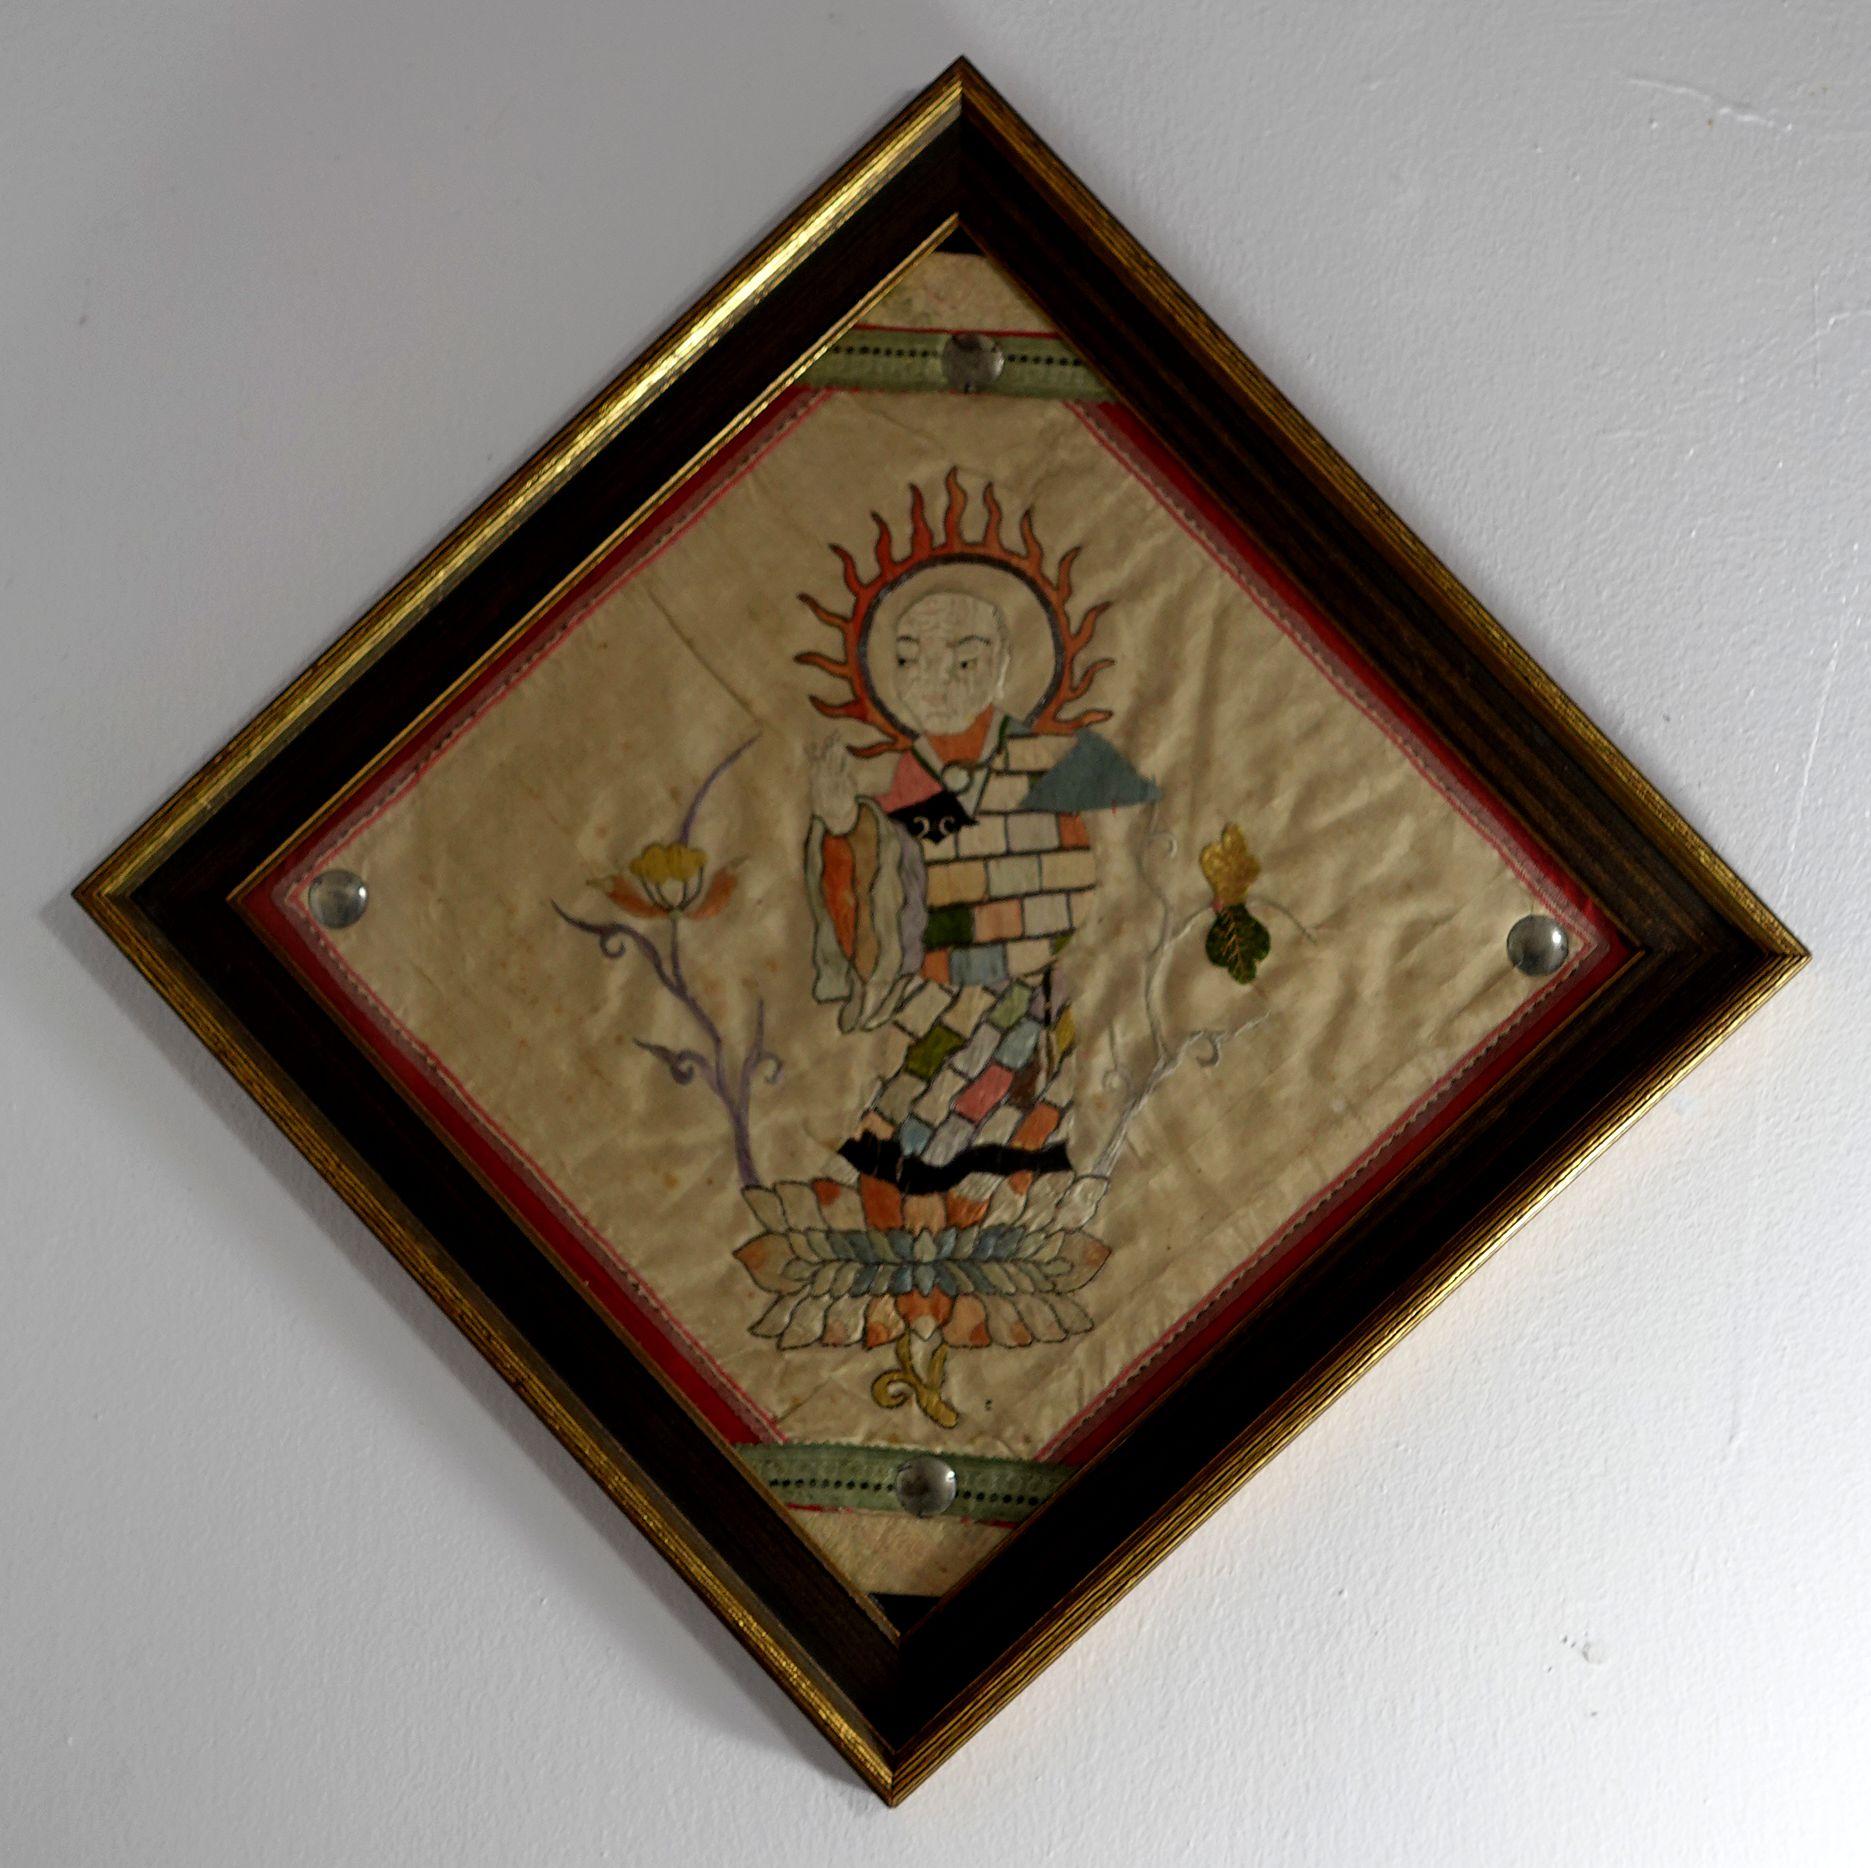 Antique Pair of Embroidered Panels of two Buddhist Saints (Lohans) sitting on the lotus. They are framed and with glass.